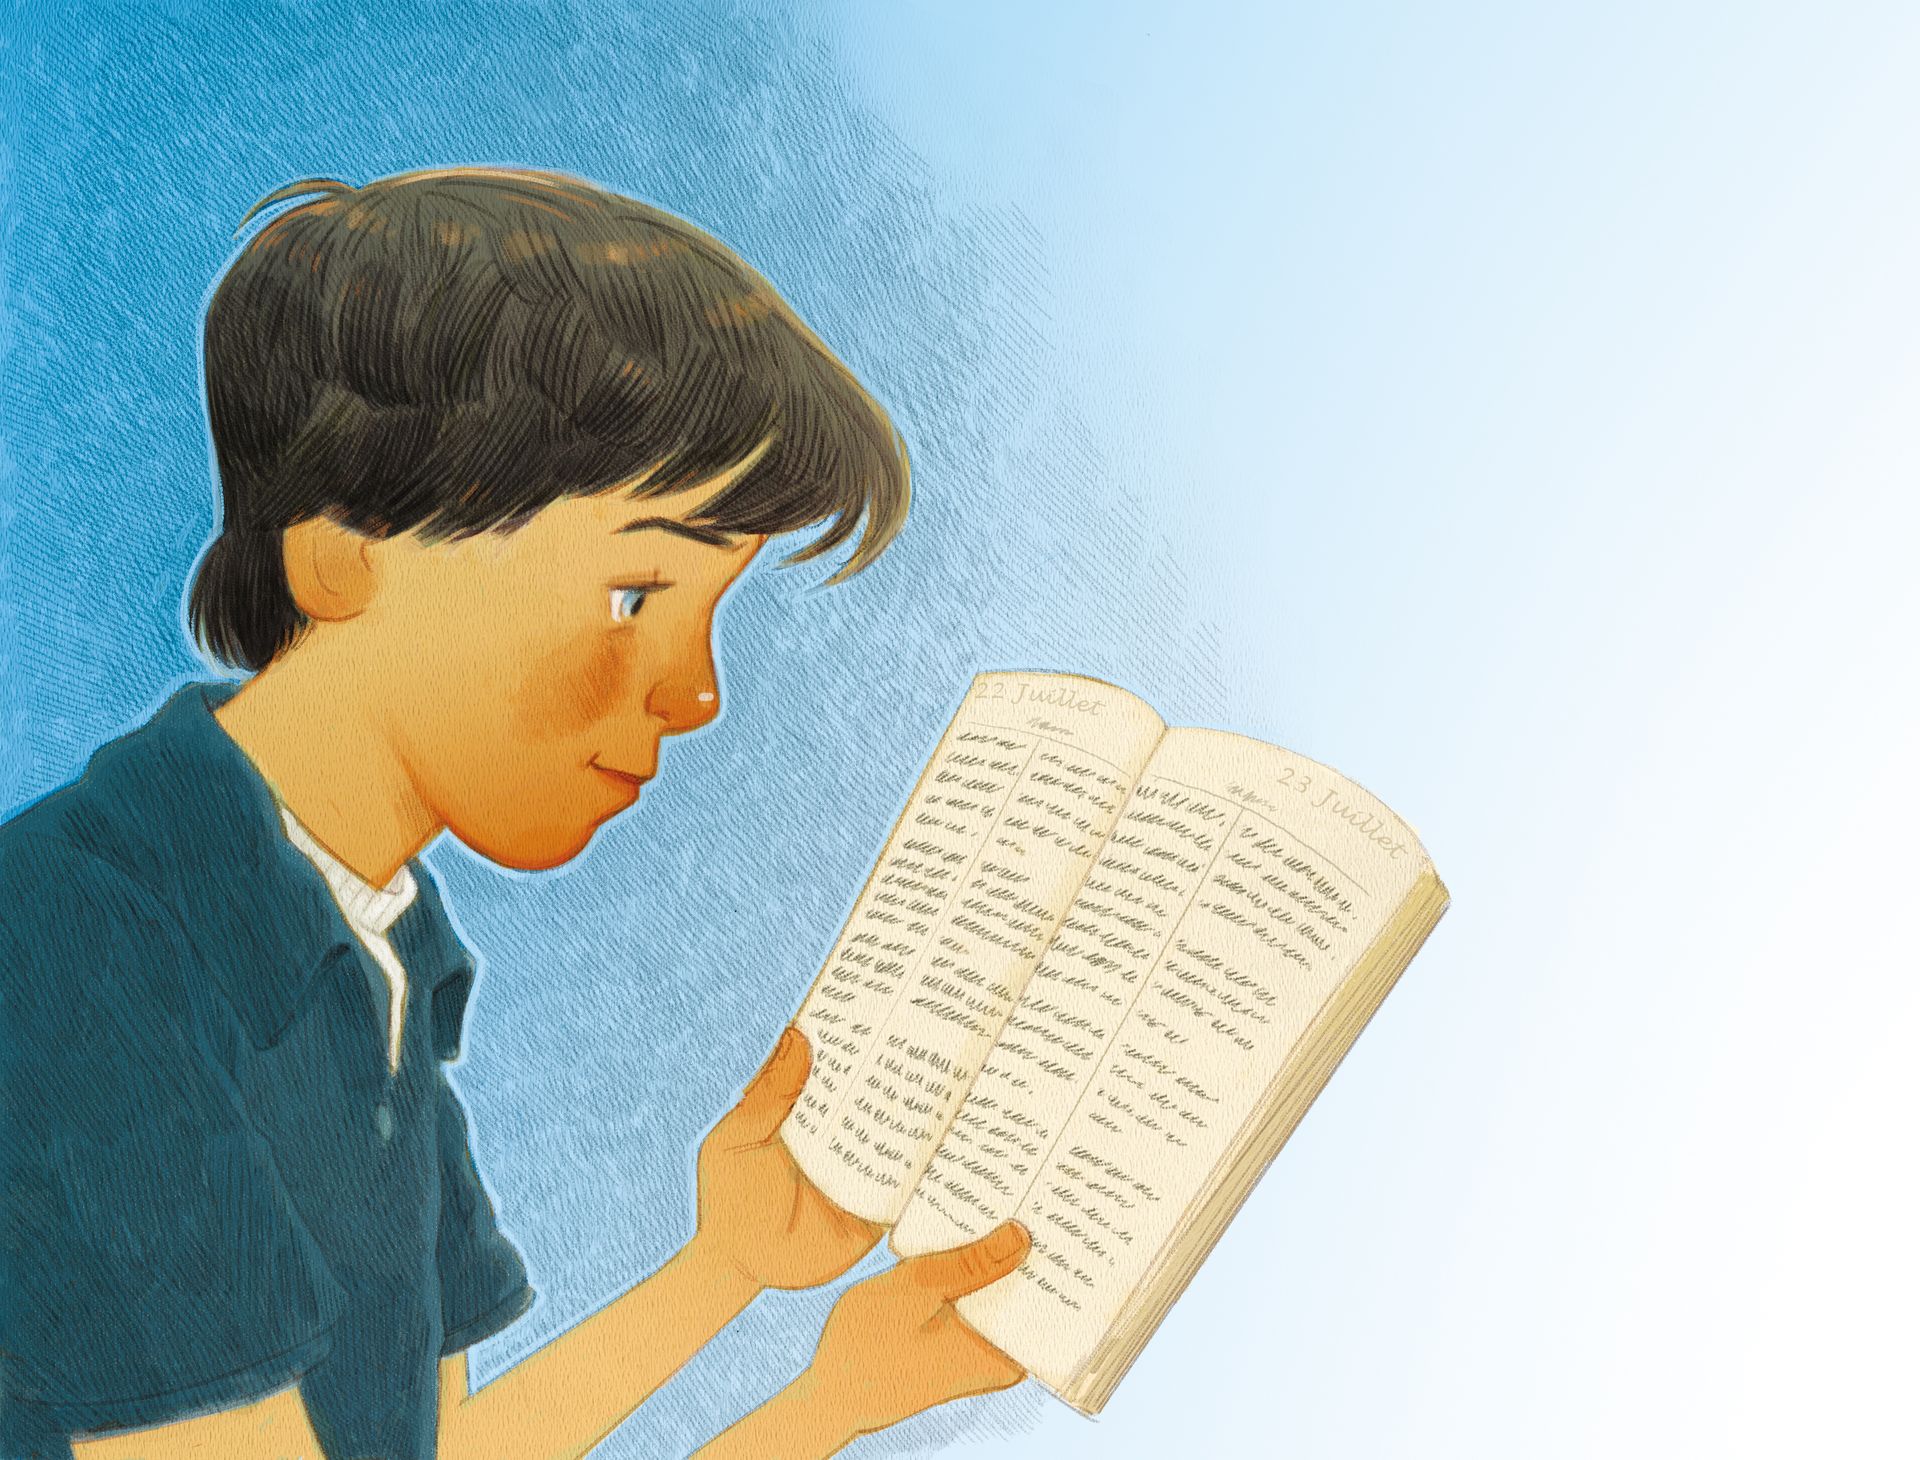 A boy holds open a set of scriptures and reads from them.